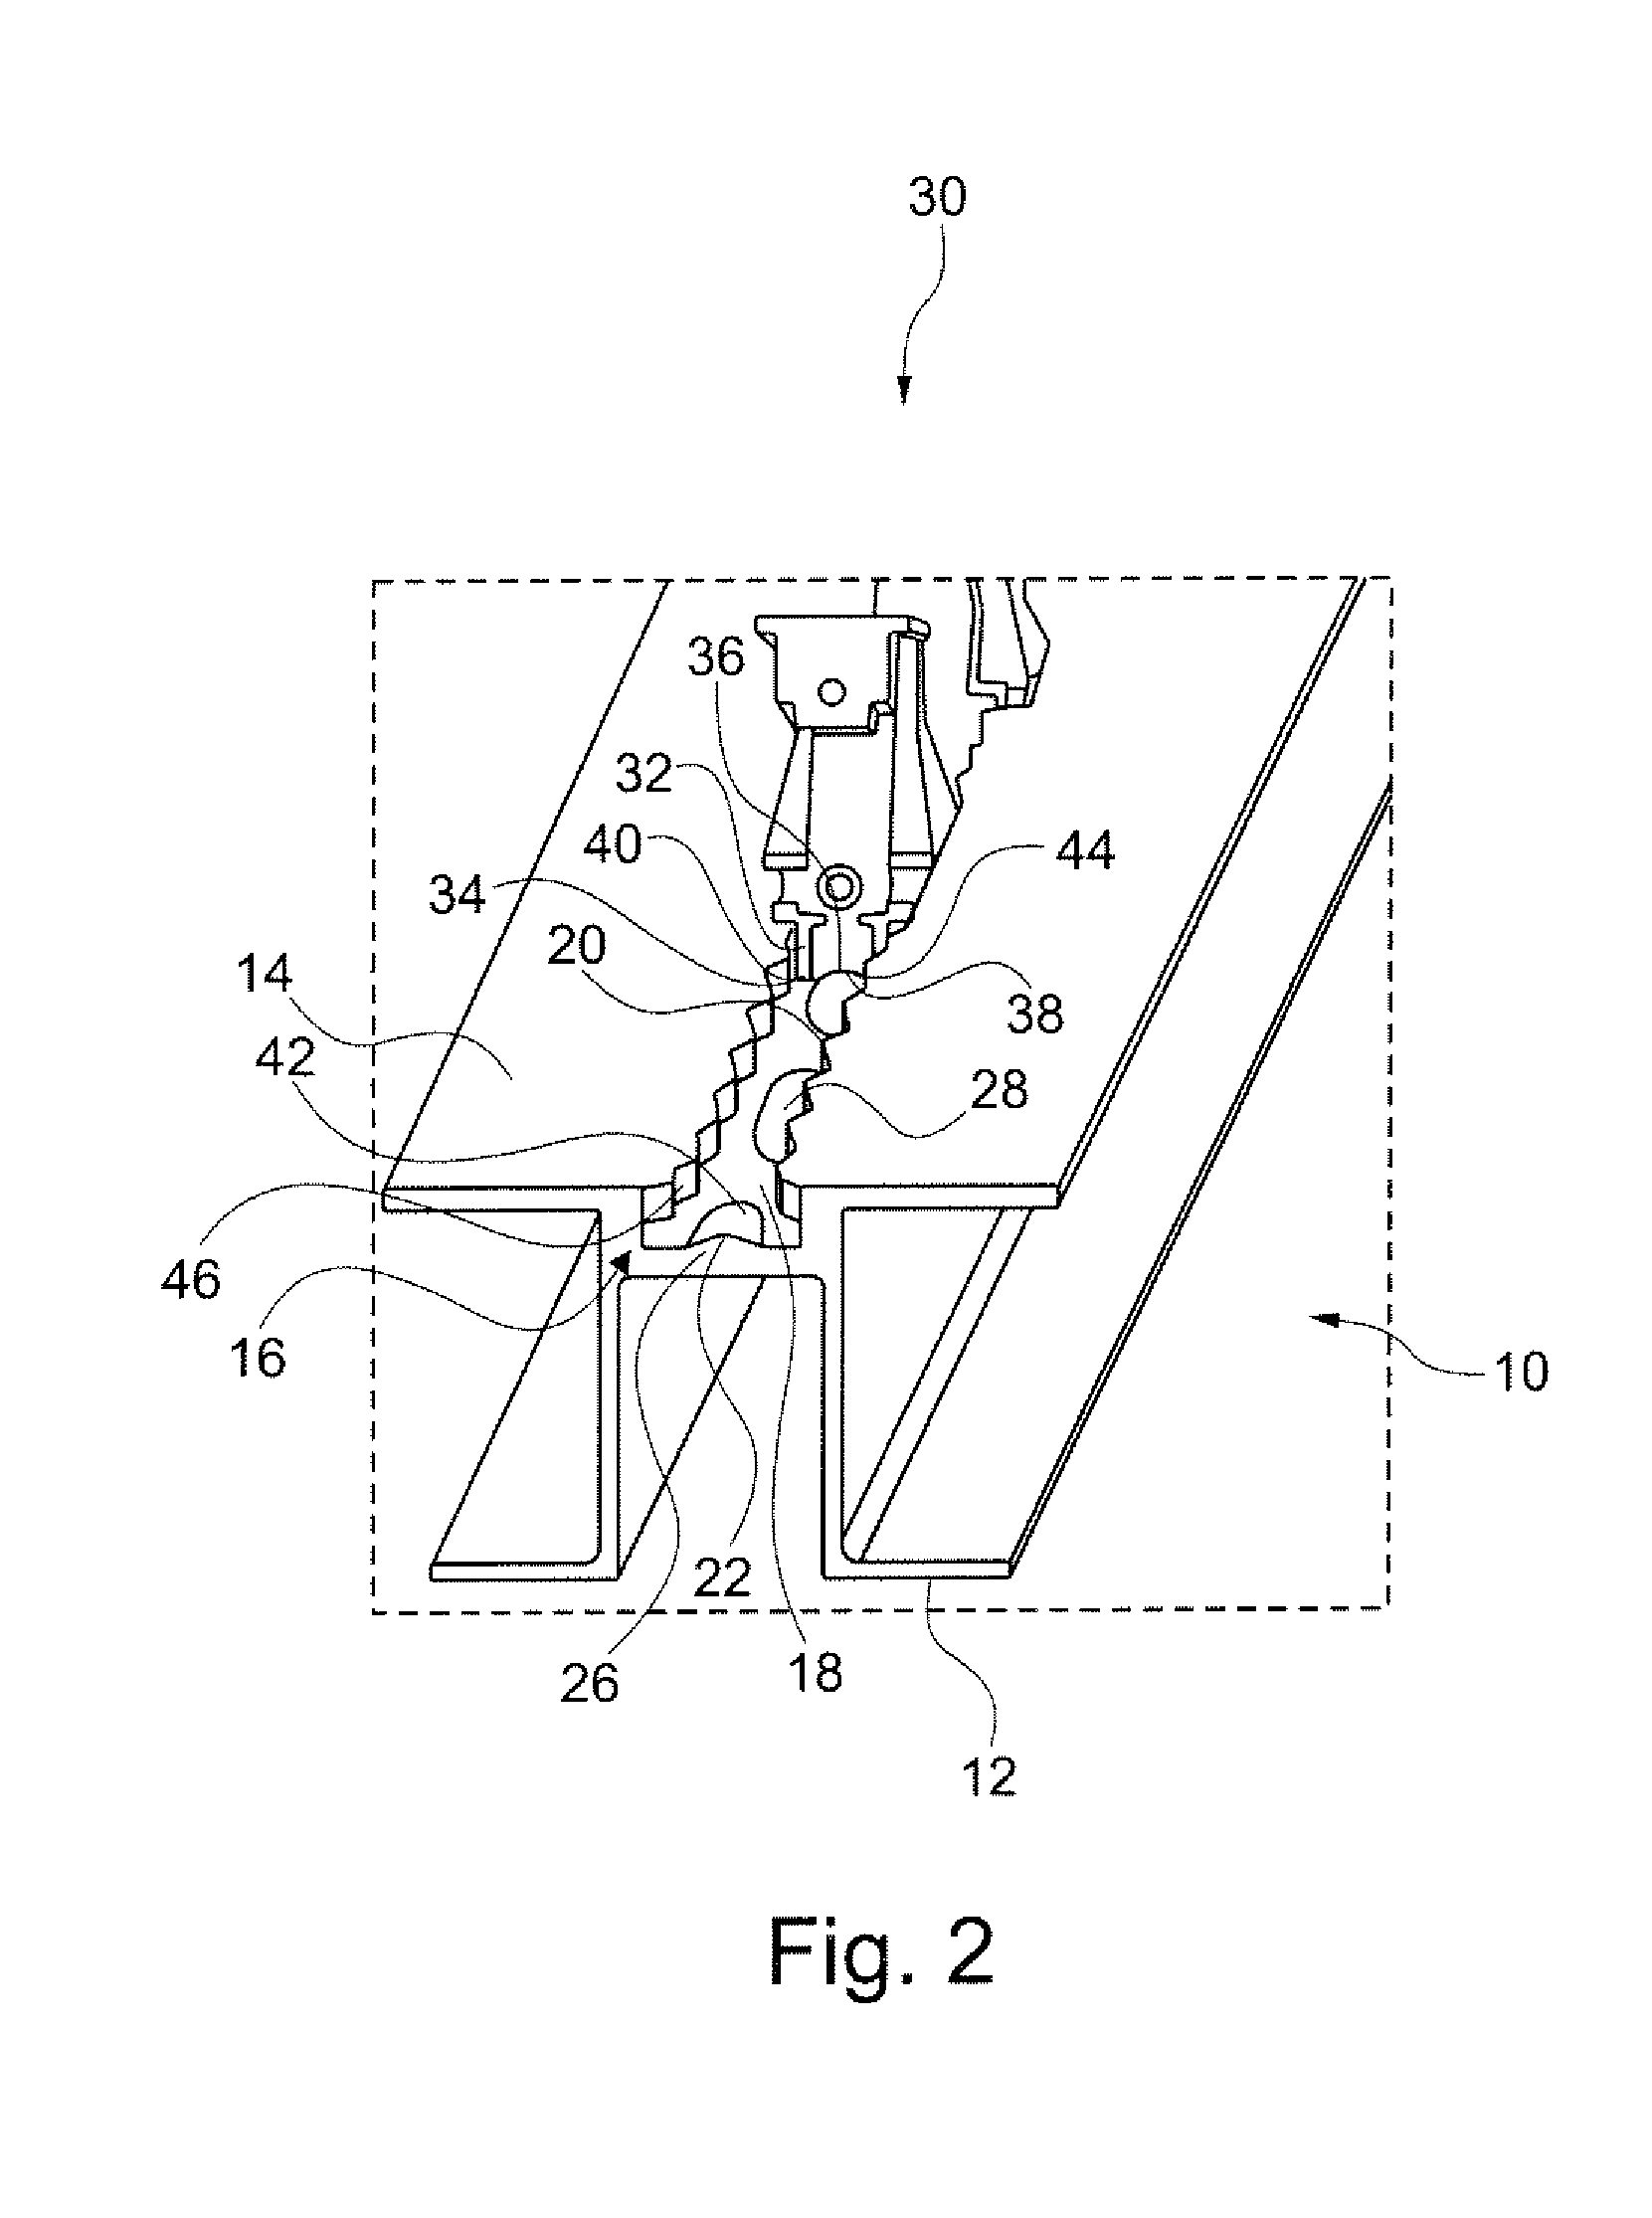 Rail arrangement for guiding a fitting inside guiding rails particularly in aircrafts